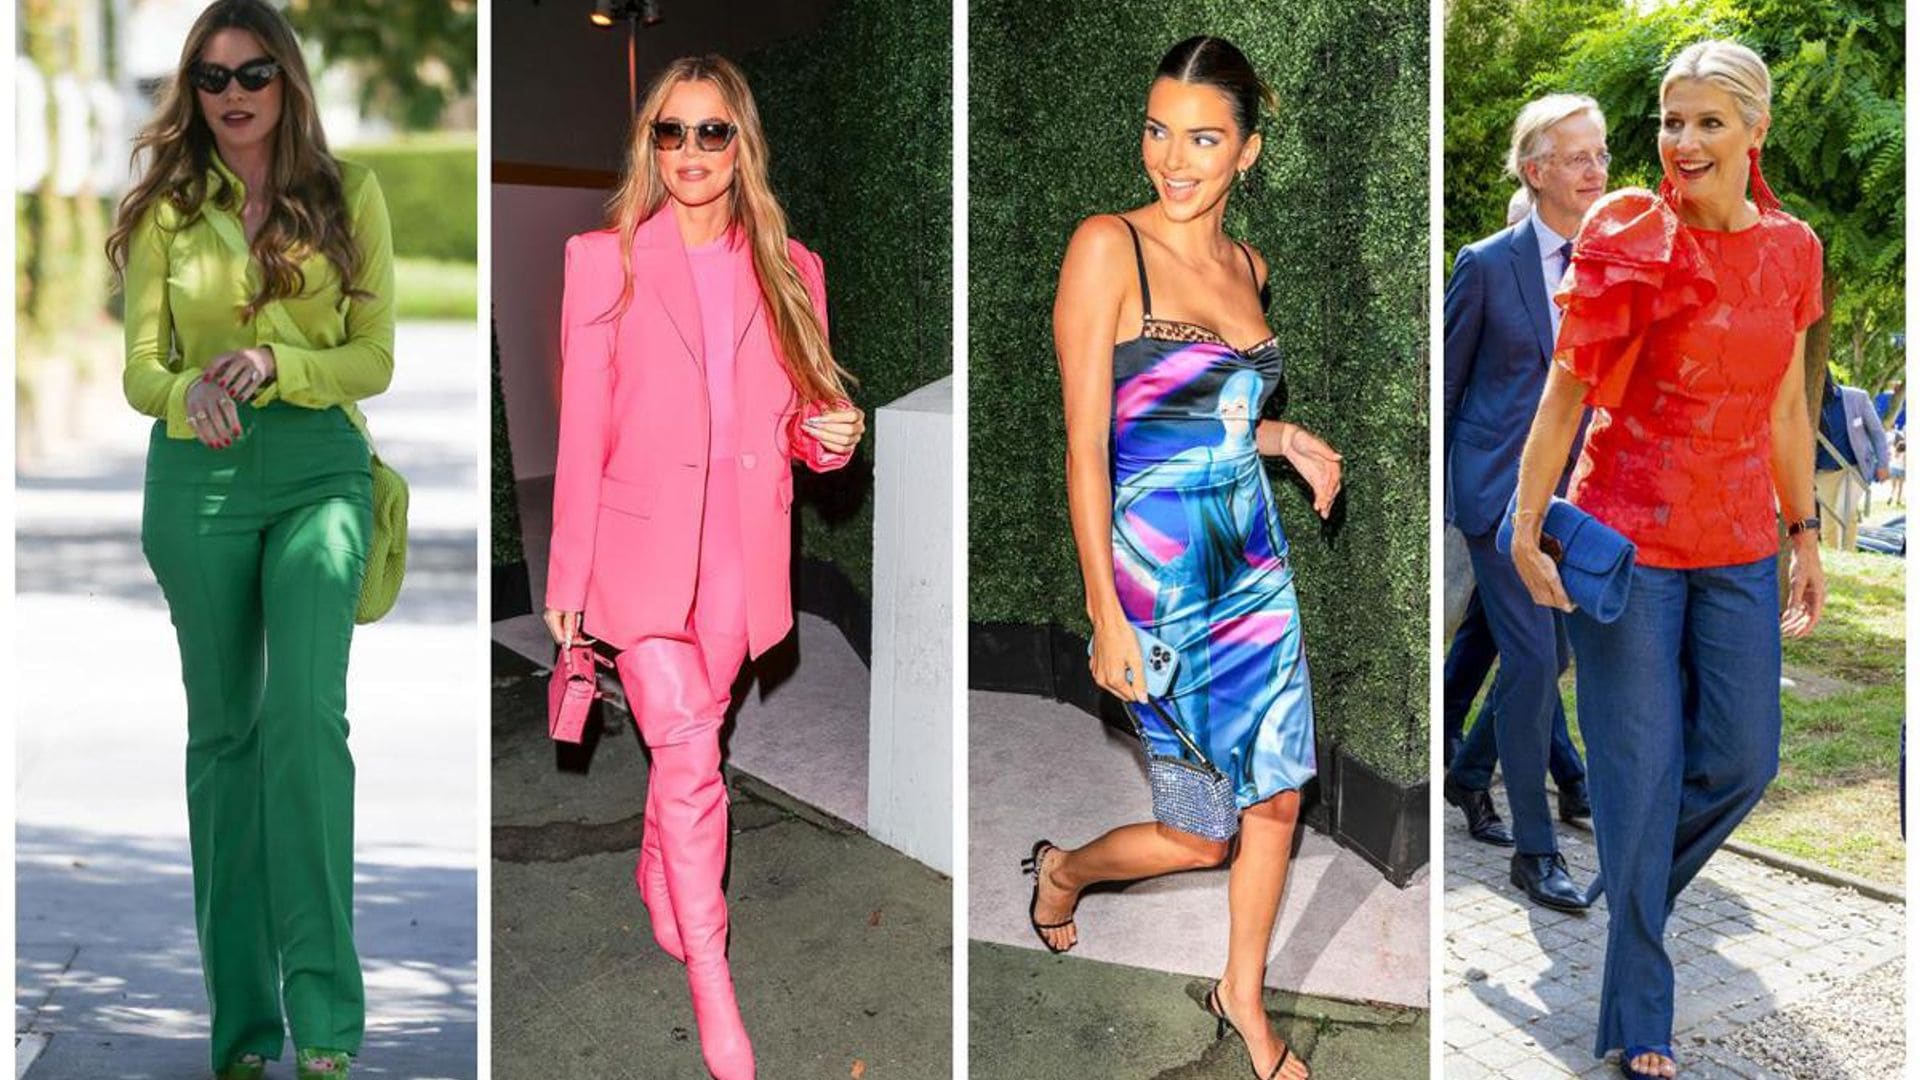 Top Celeb Styles of the Week - August 26th